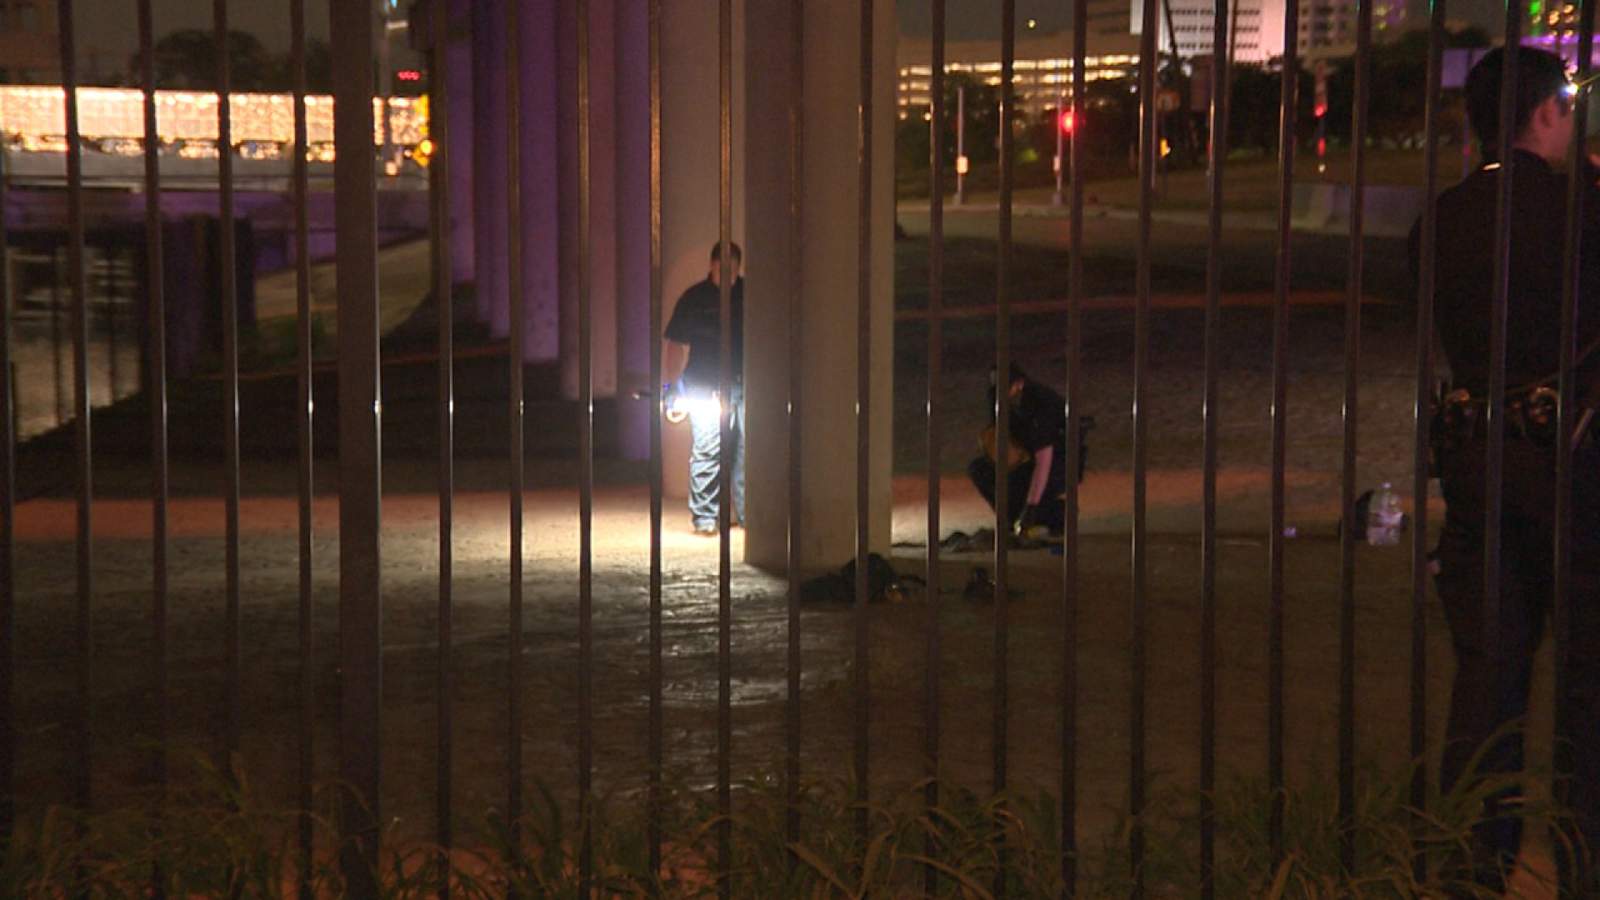 Man found stabbed multiple times under I-35 bridge, police say